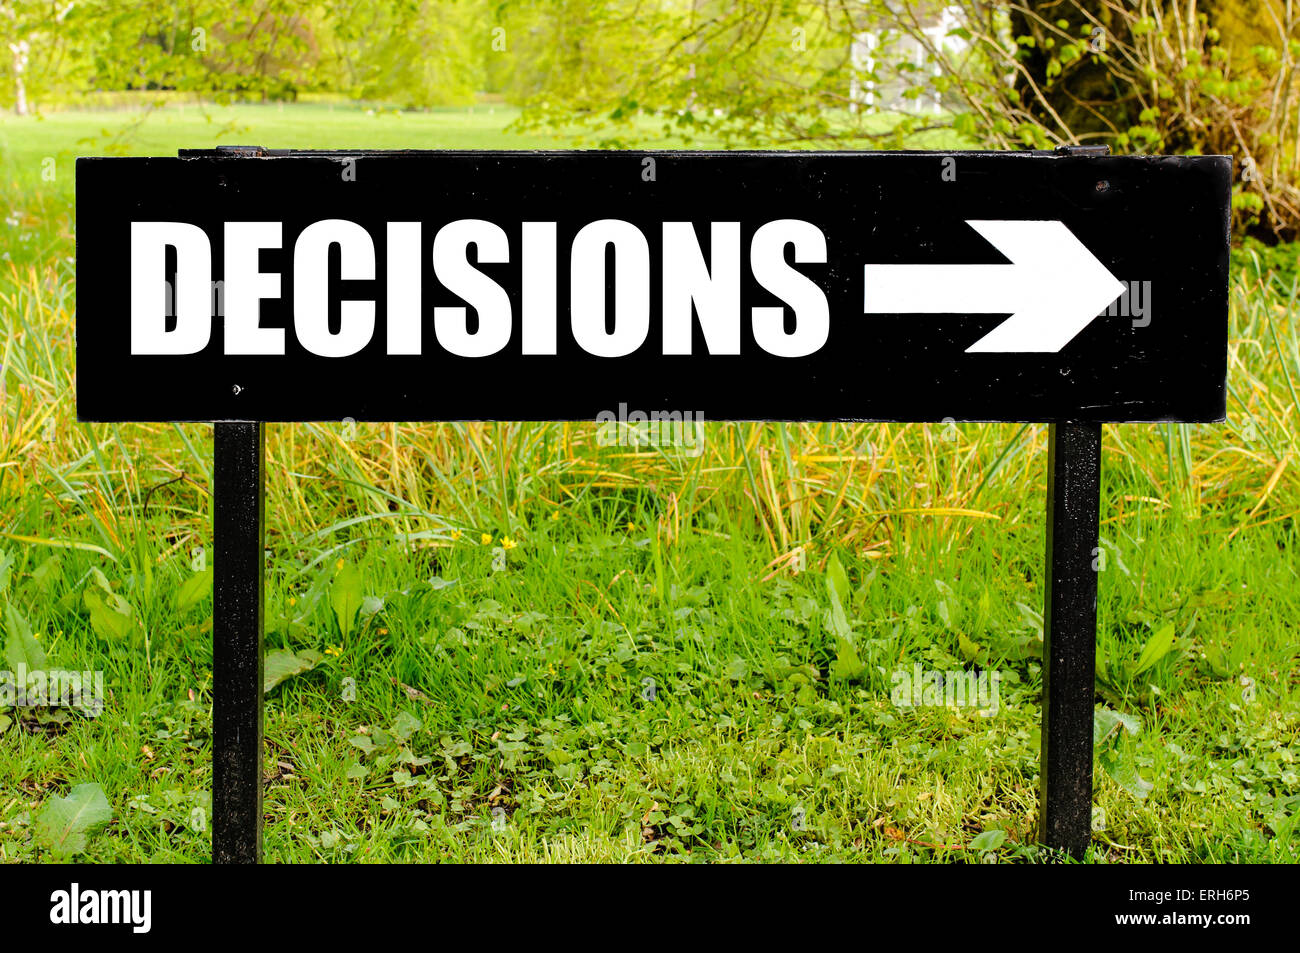 DECISIONS written on directional black metal sign with arrow pointing to the right against natural green background. Concept image with available copy space Stock Photo